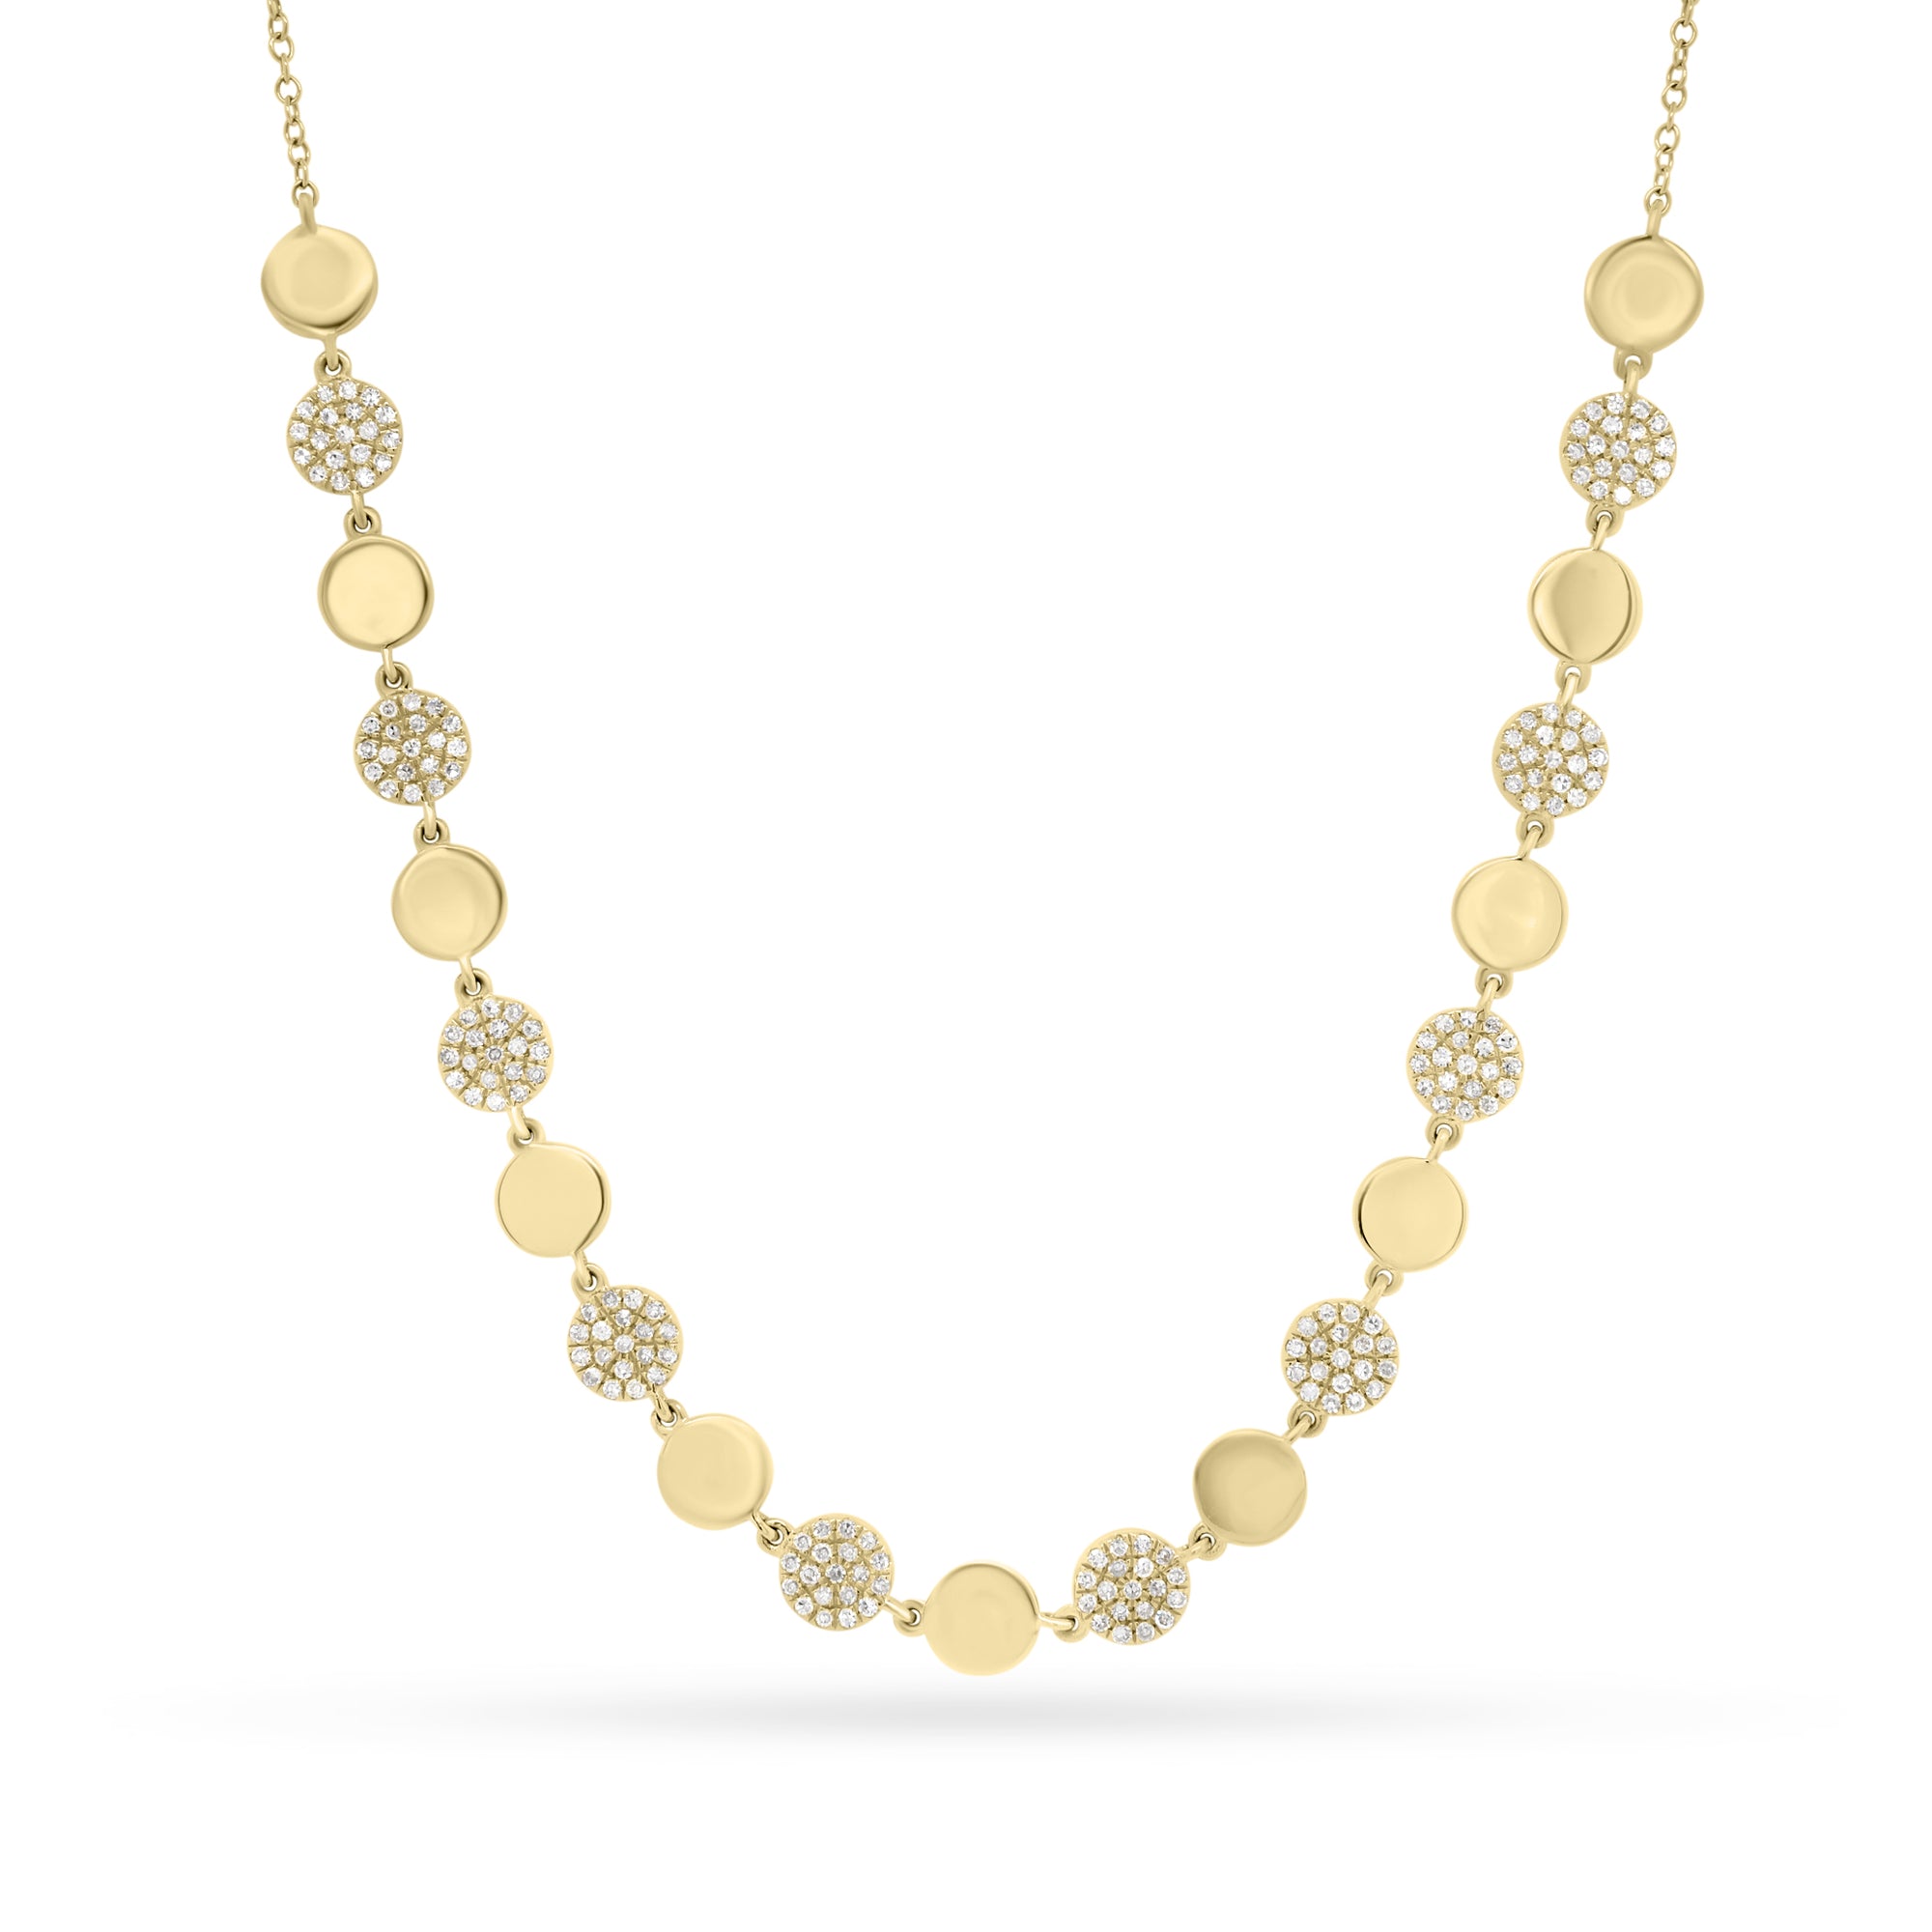 Diamond & Gold Disc Necklace  - 14K gold weighing 4.25 grams  - 190 round diamonds totaling 0.42 carats